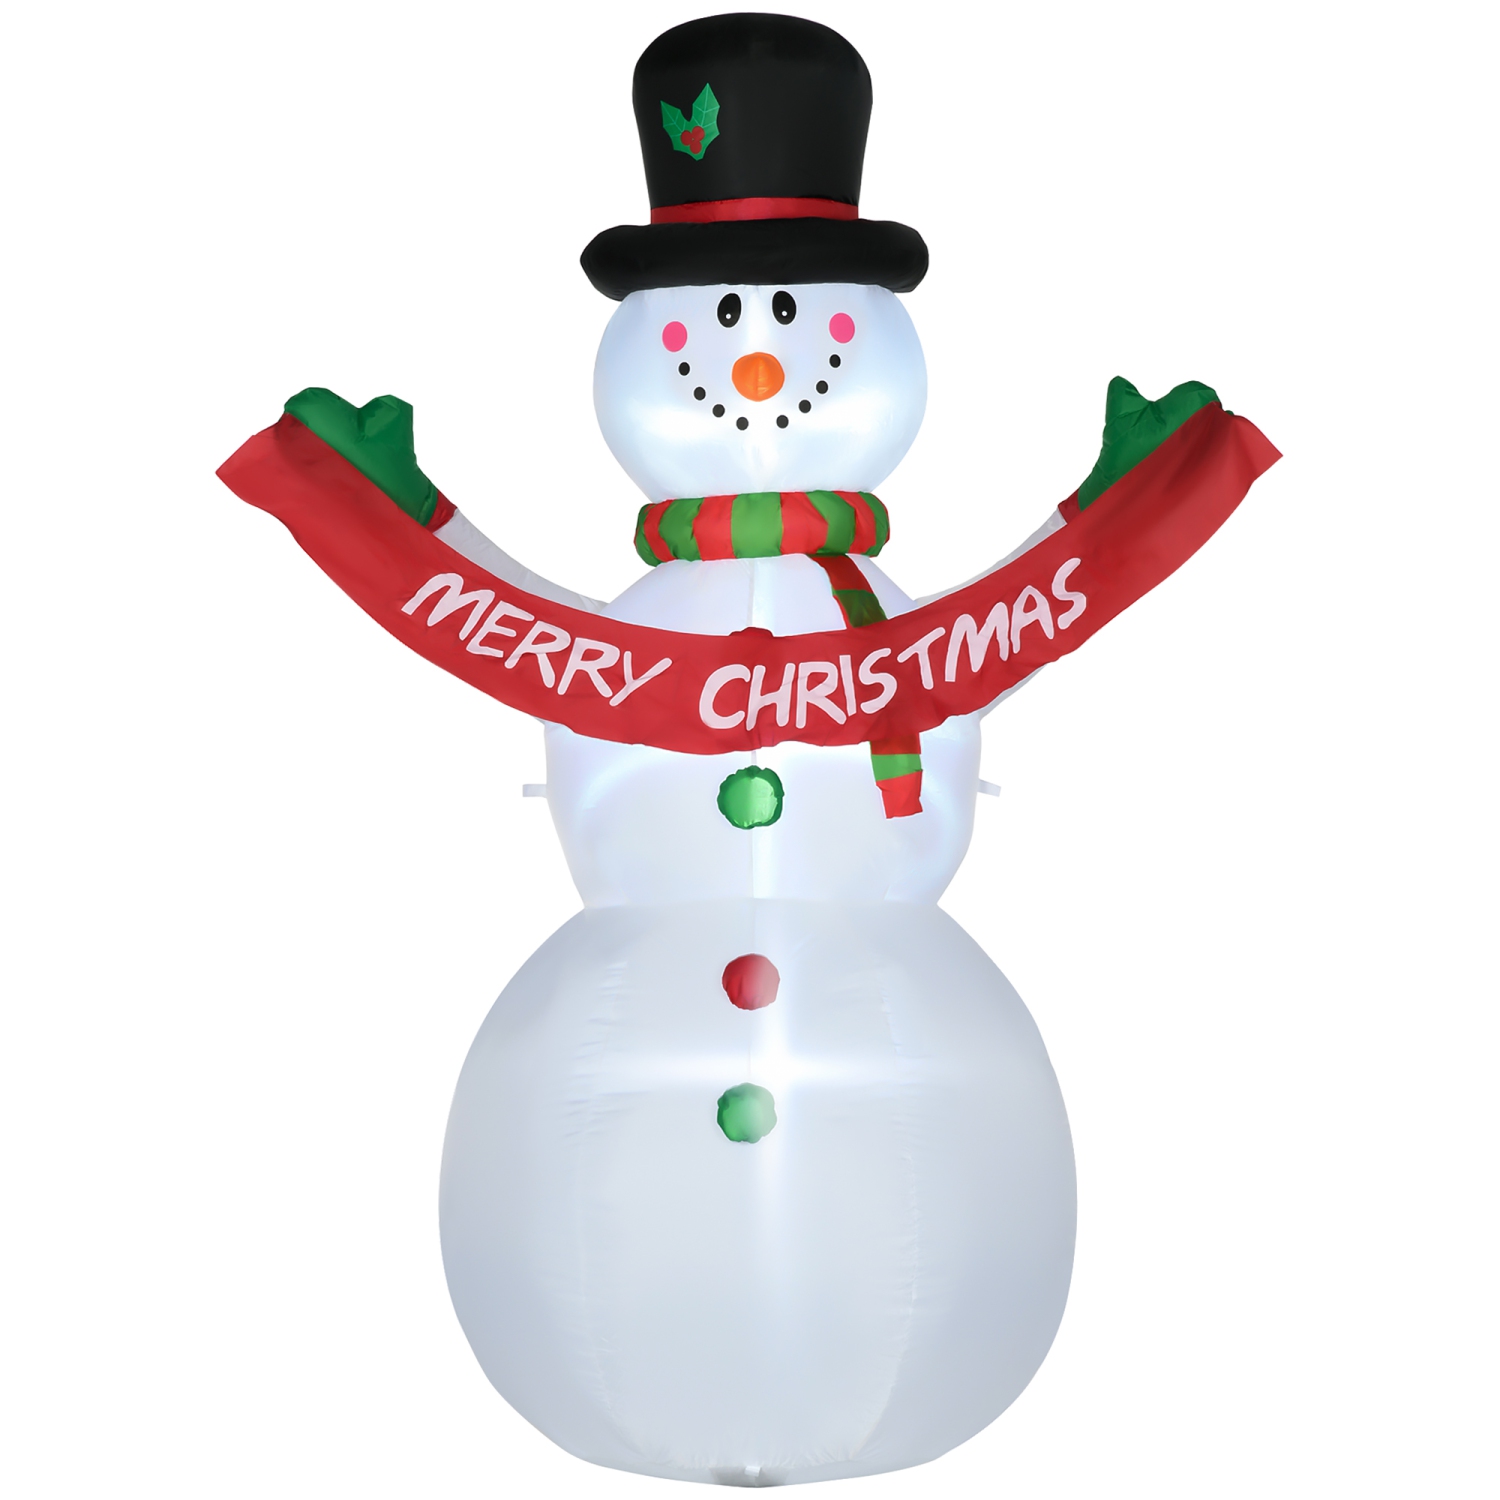 HOMCOM 8ft Inflatable Christmas Decoration Snowman with Merry Christmas Banner, Blow-Up Outdoor LED Yard Display for Lawn, Garden, Party